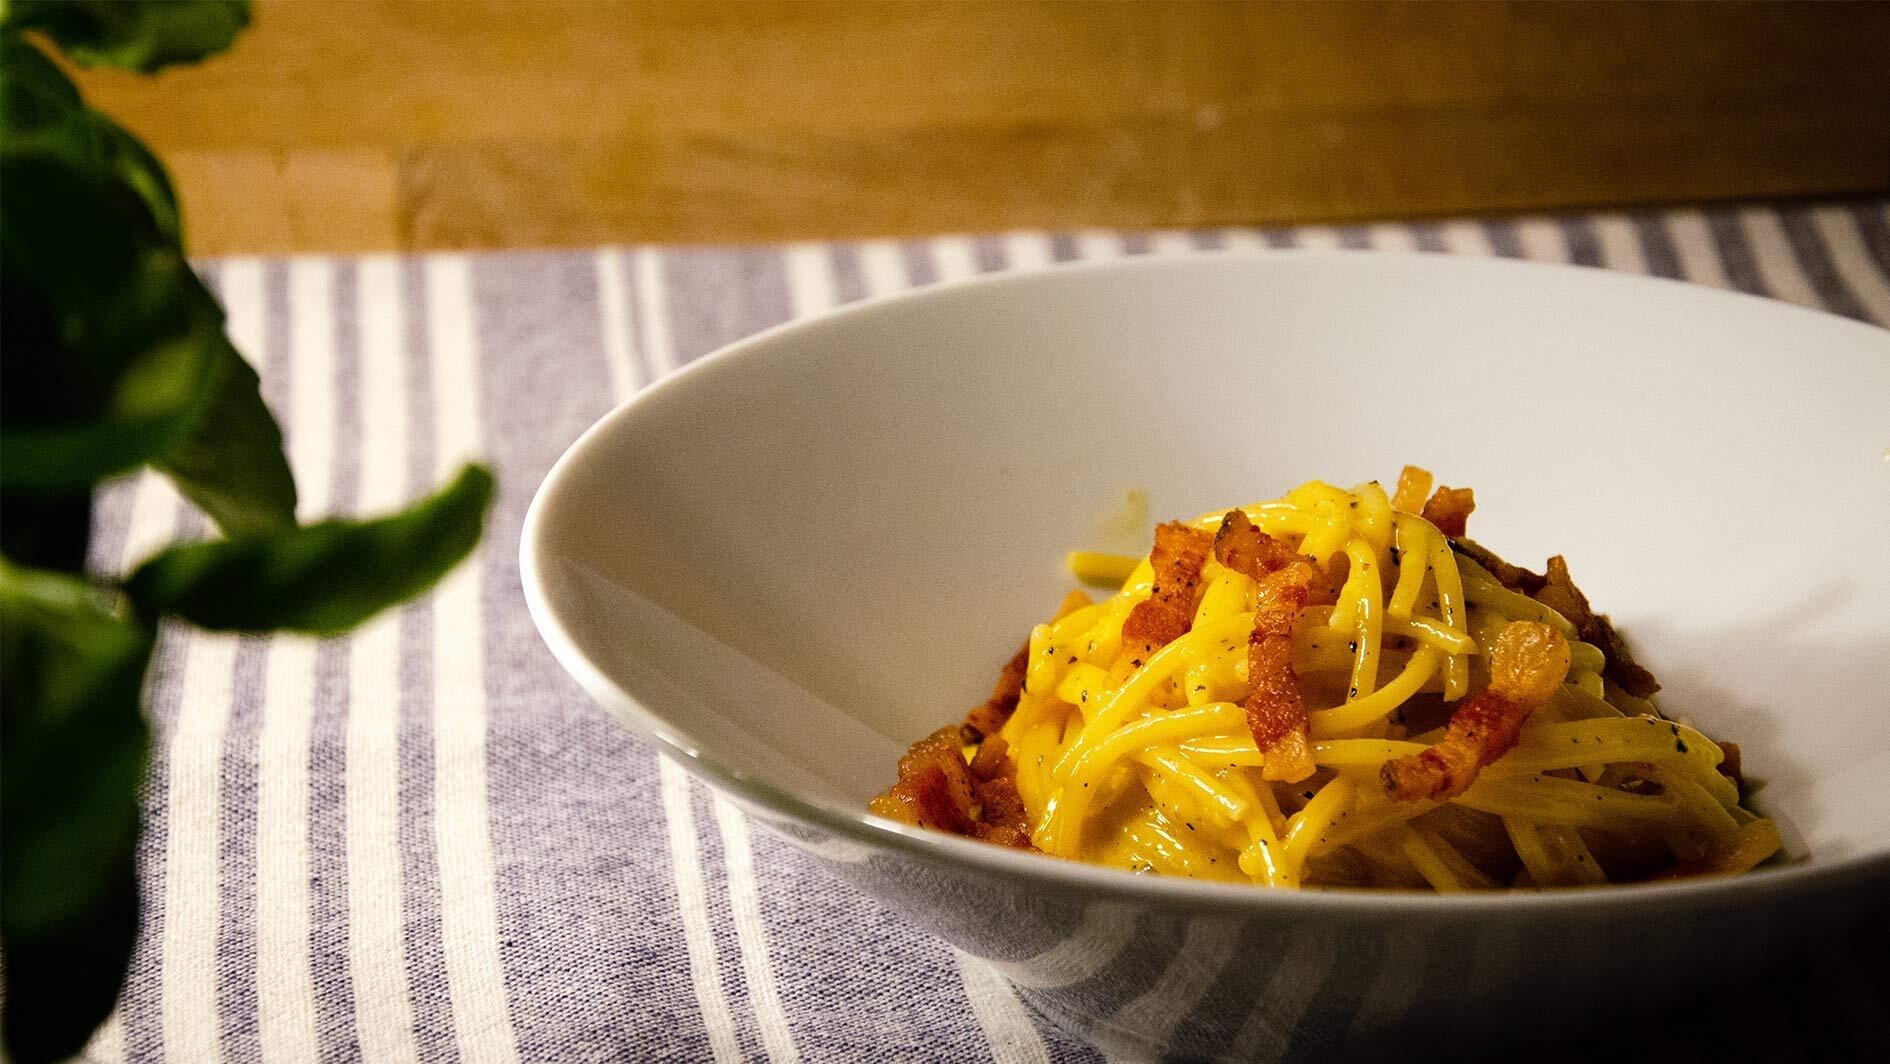 An image of a bowl sitting on a blue and white striped table cloth. The bowl has pasta with bacon inside of it.